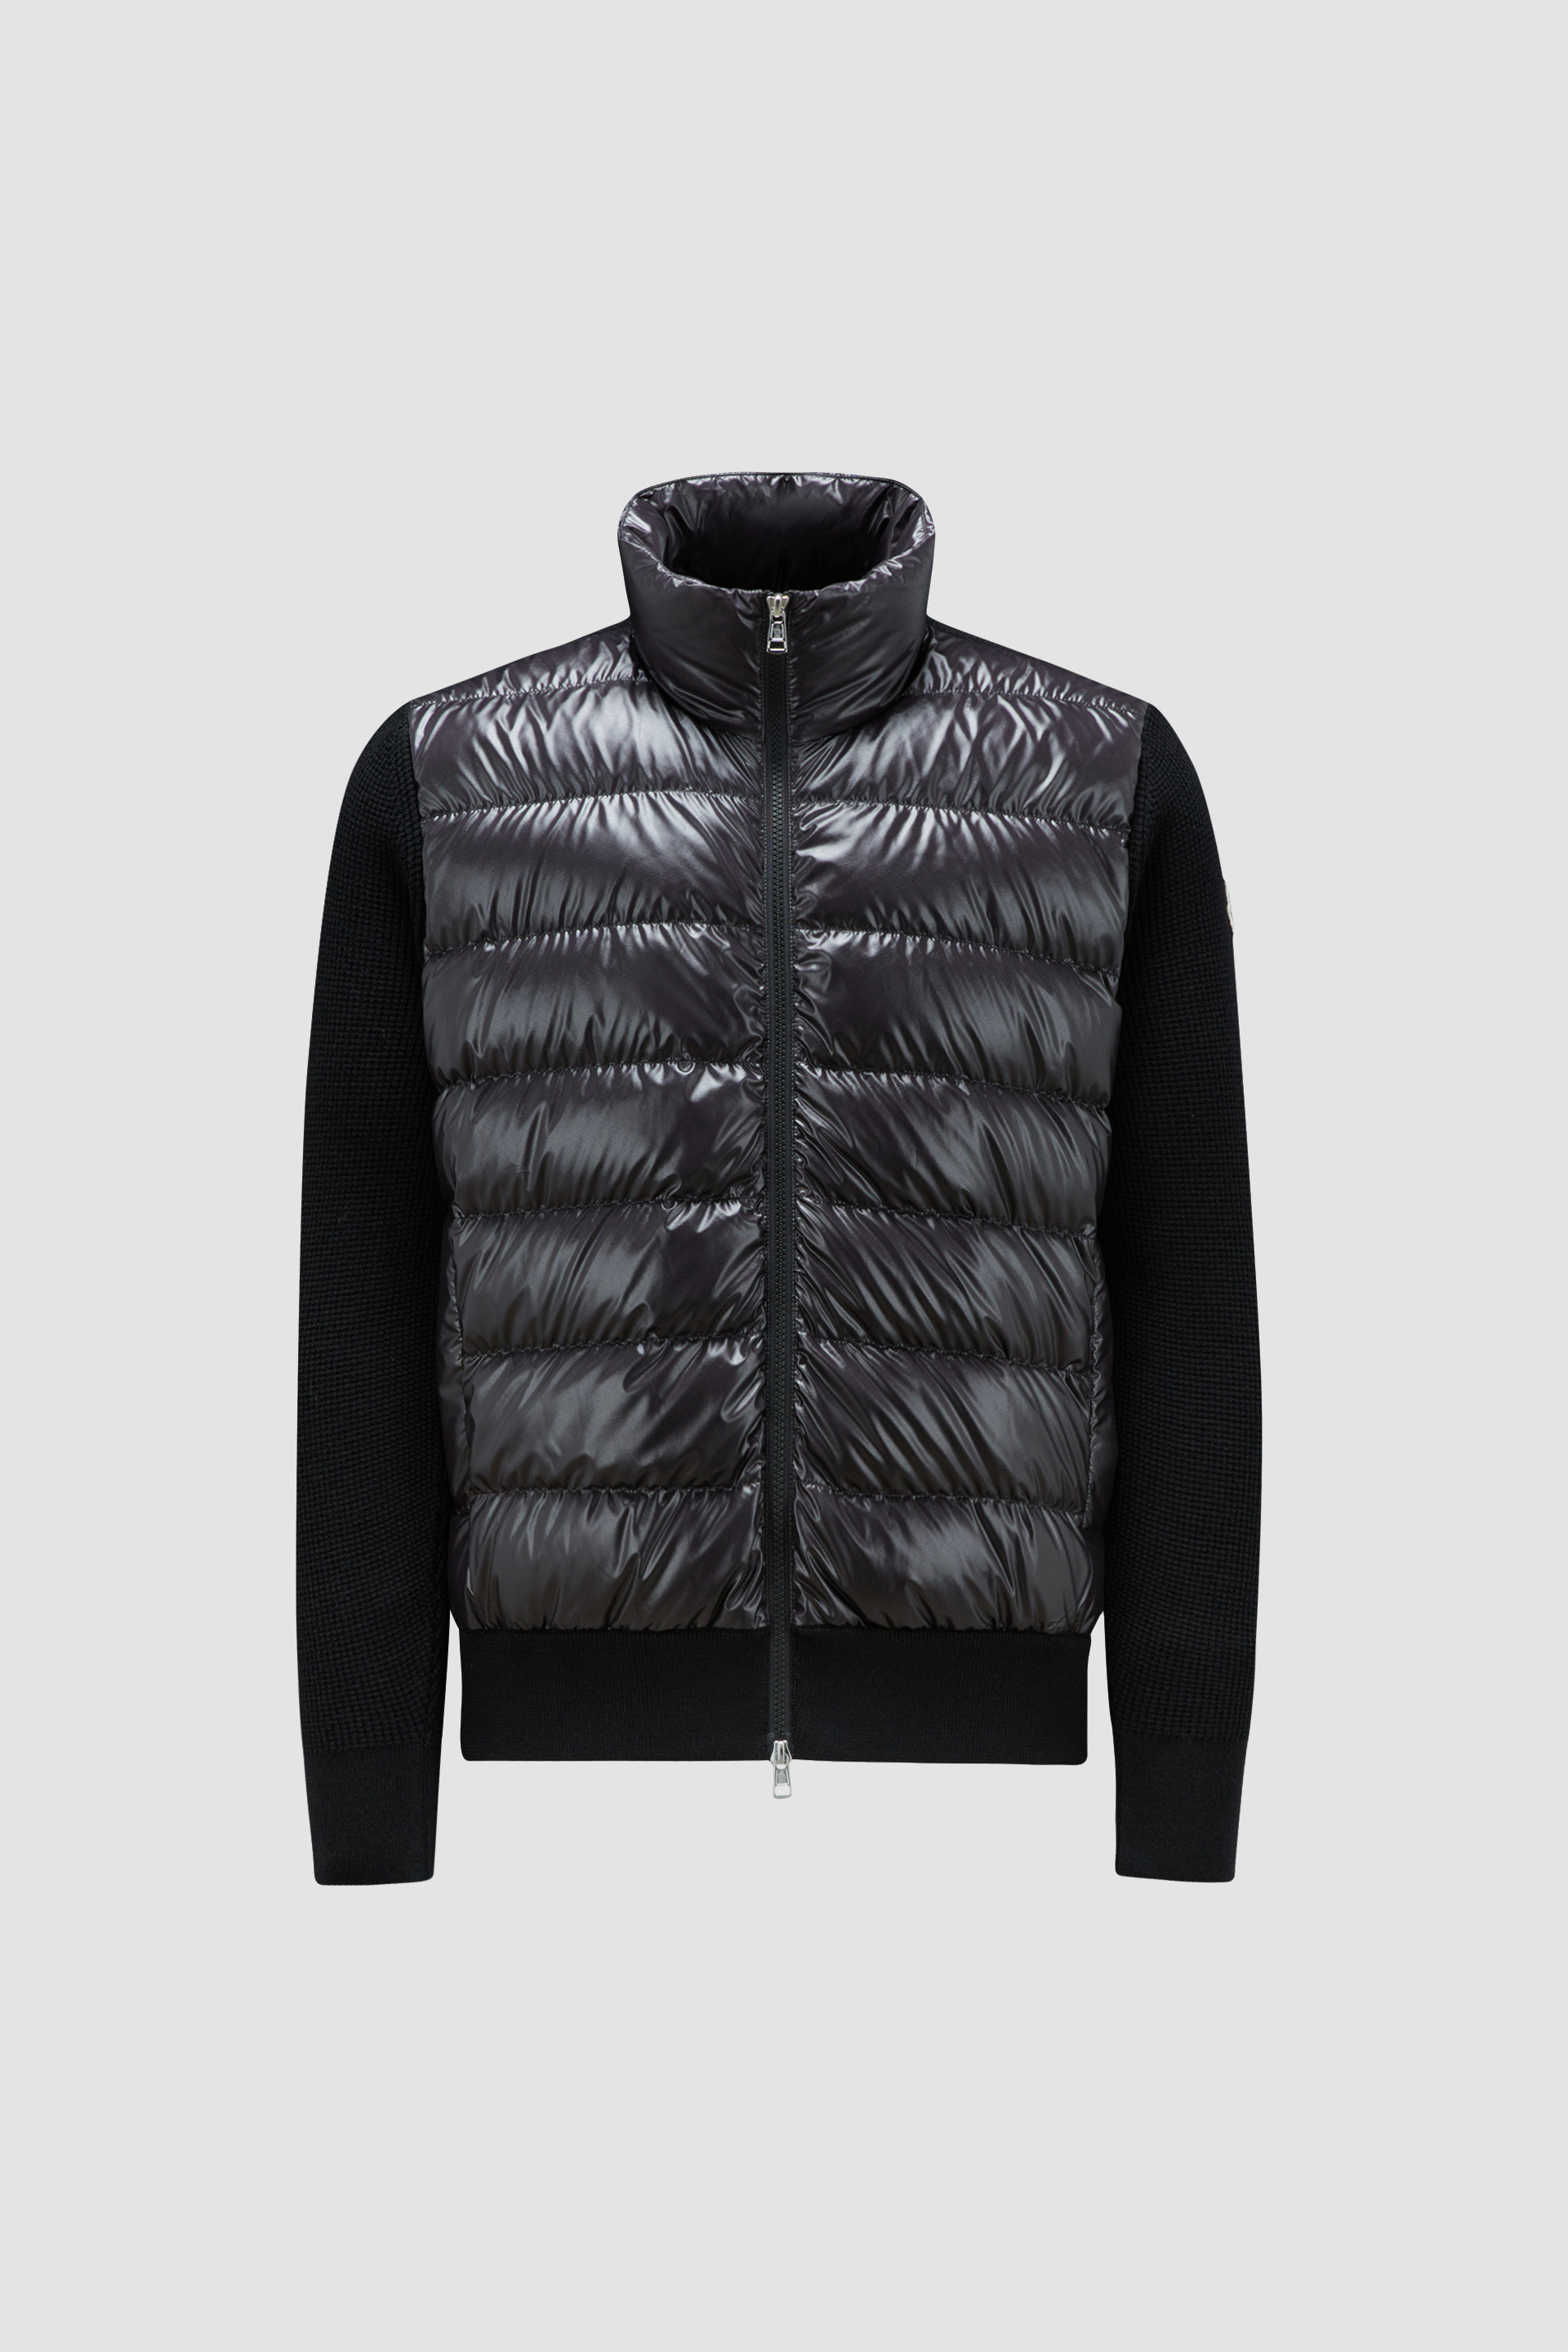 Graphic Padded Wool Cardigan by Moncler – Boyds